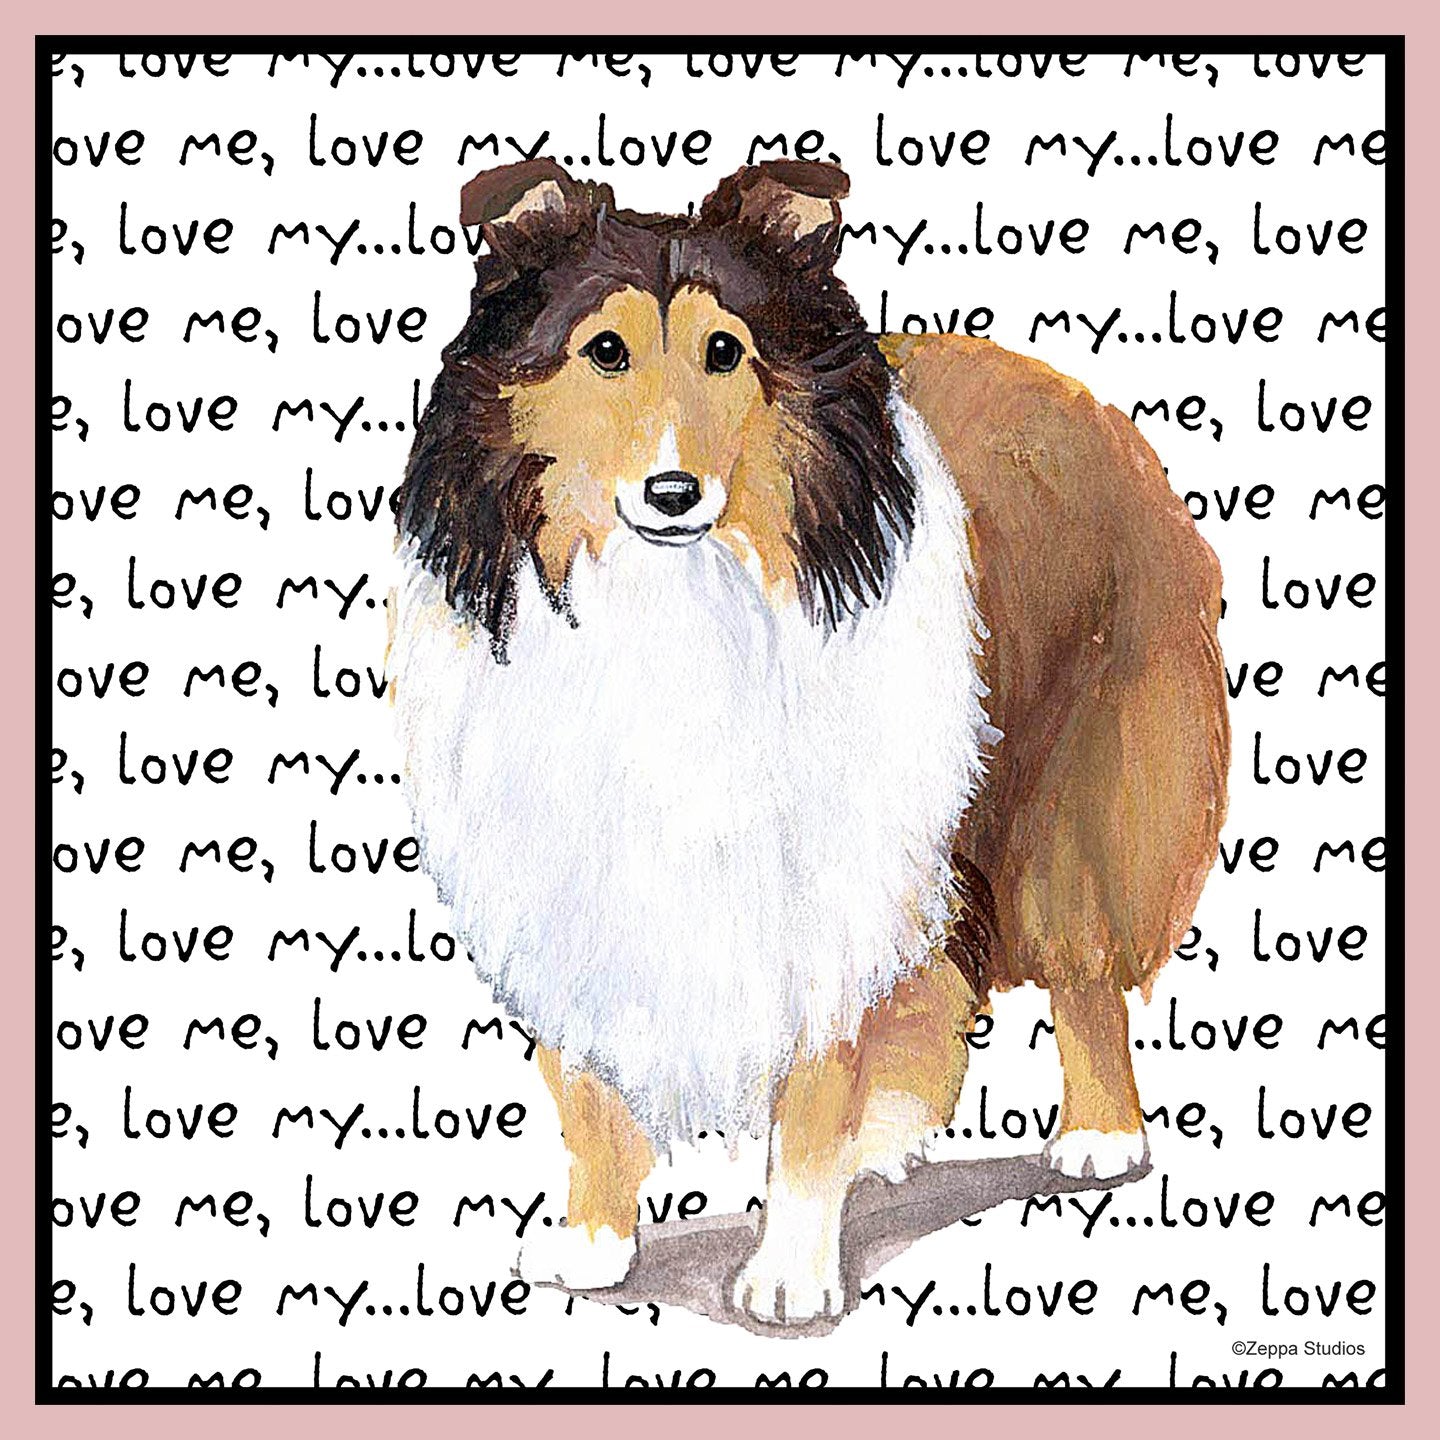 Sheltie Love Text - Women's Fitted T-Shirt